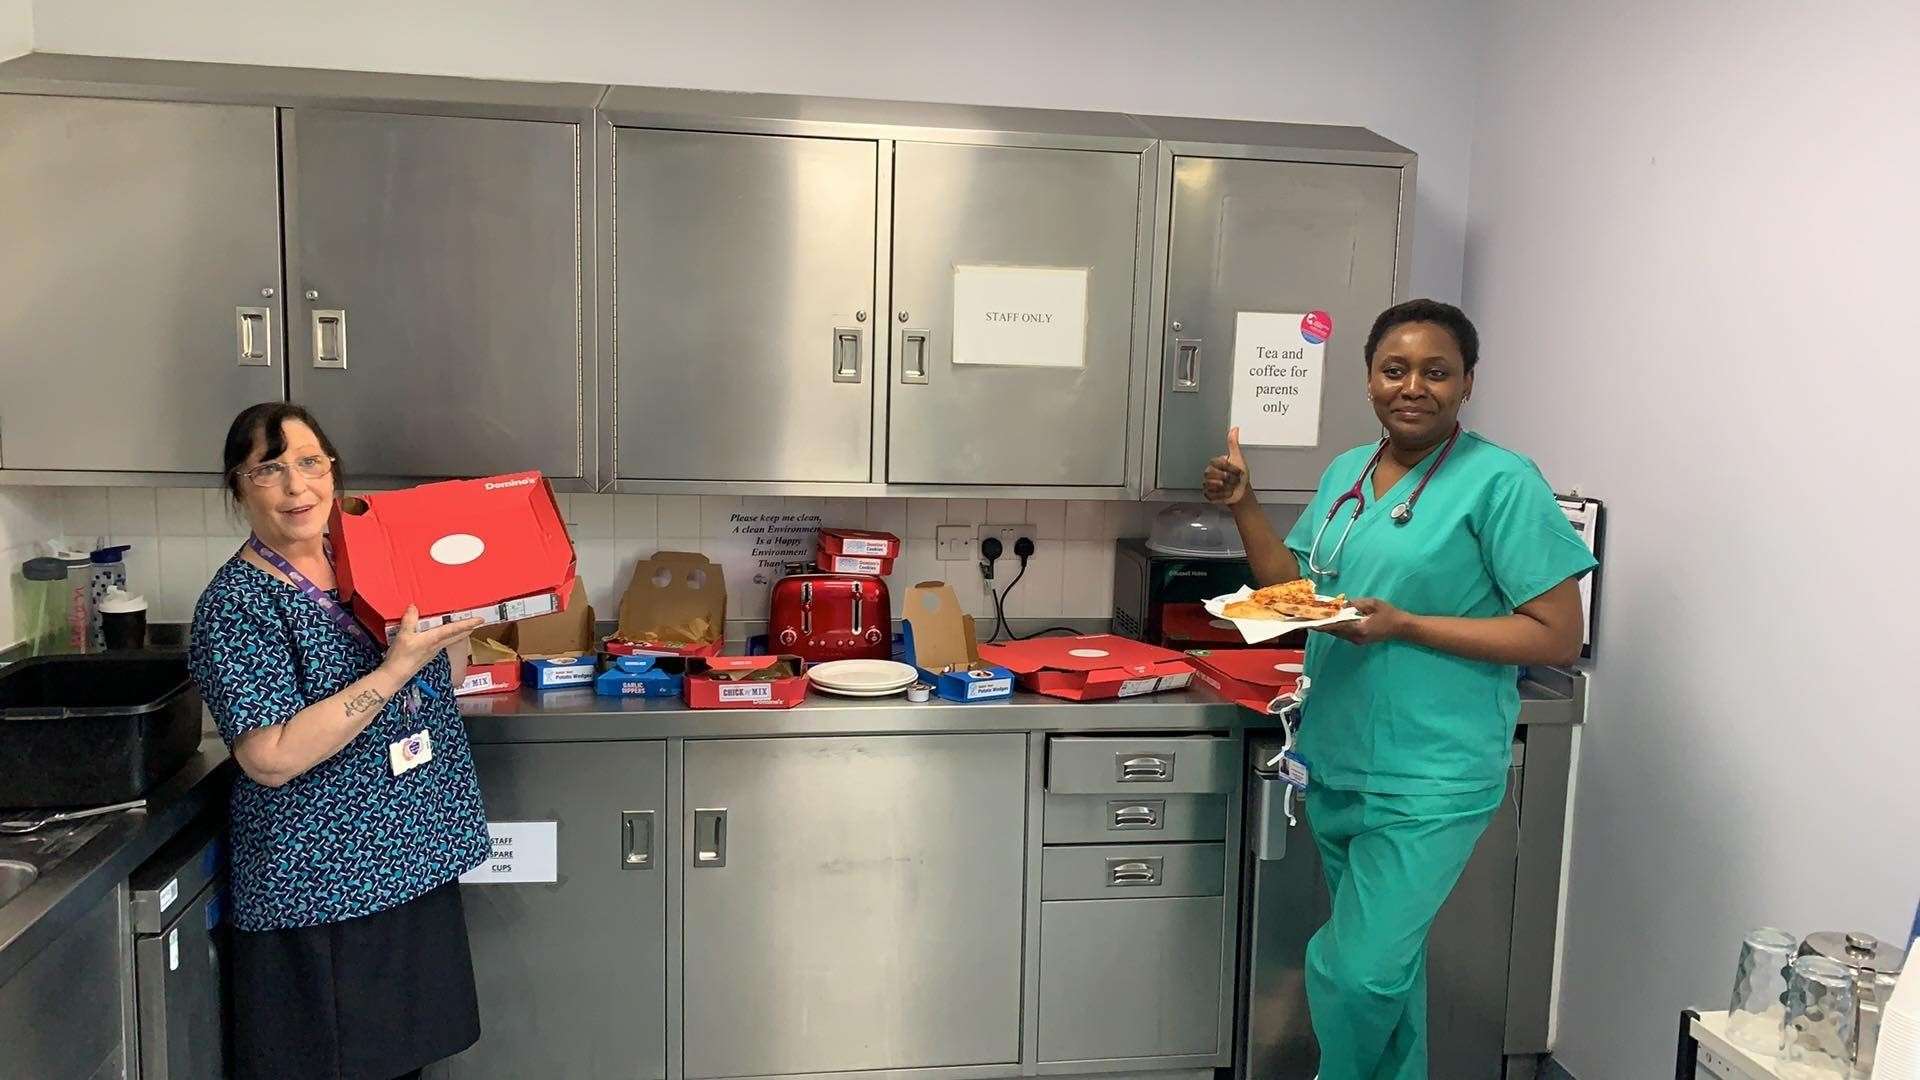 Tara Biggs has helped raise more than £4,000 to feed the hard-working staff at Darent Valley Hospital. Picture: Darent Valley Hospital, Facebook